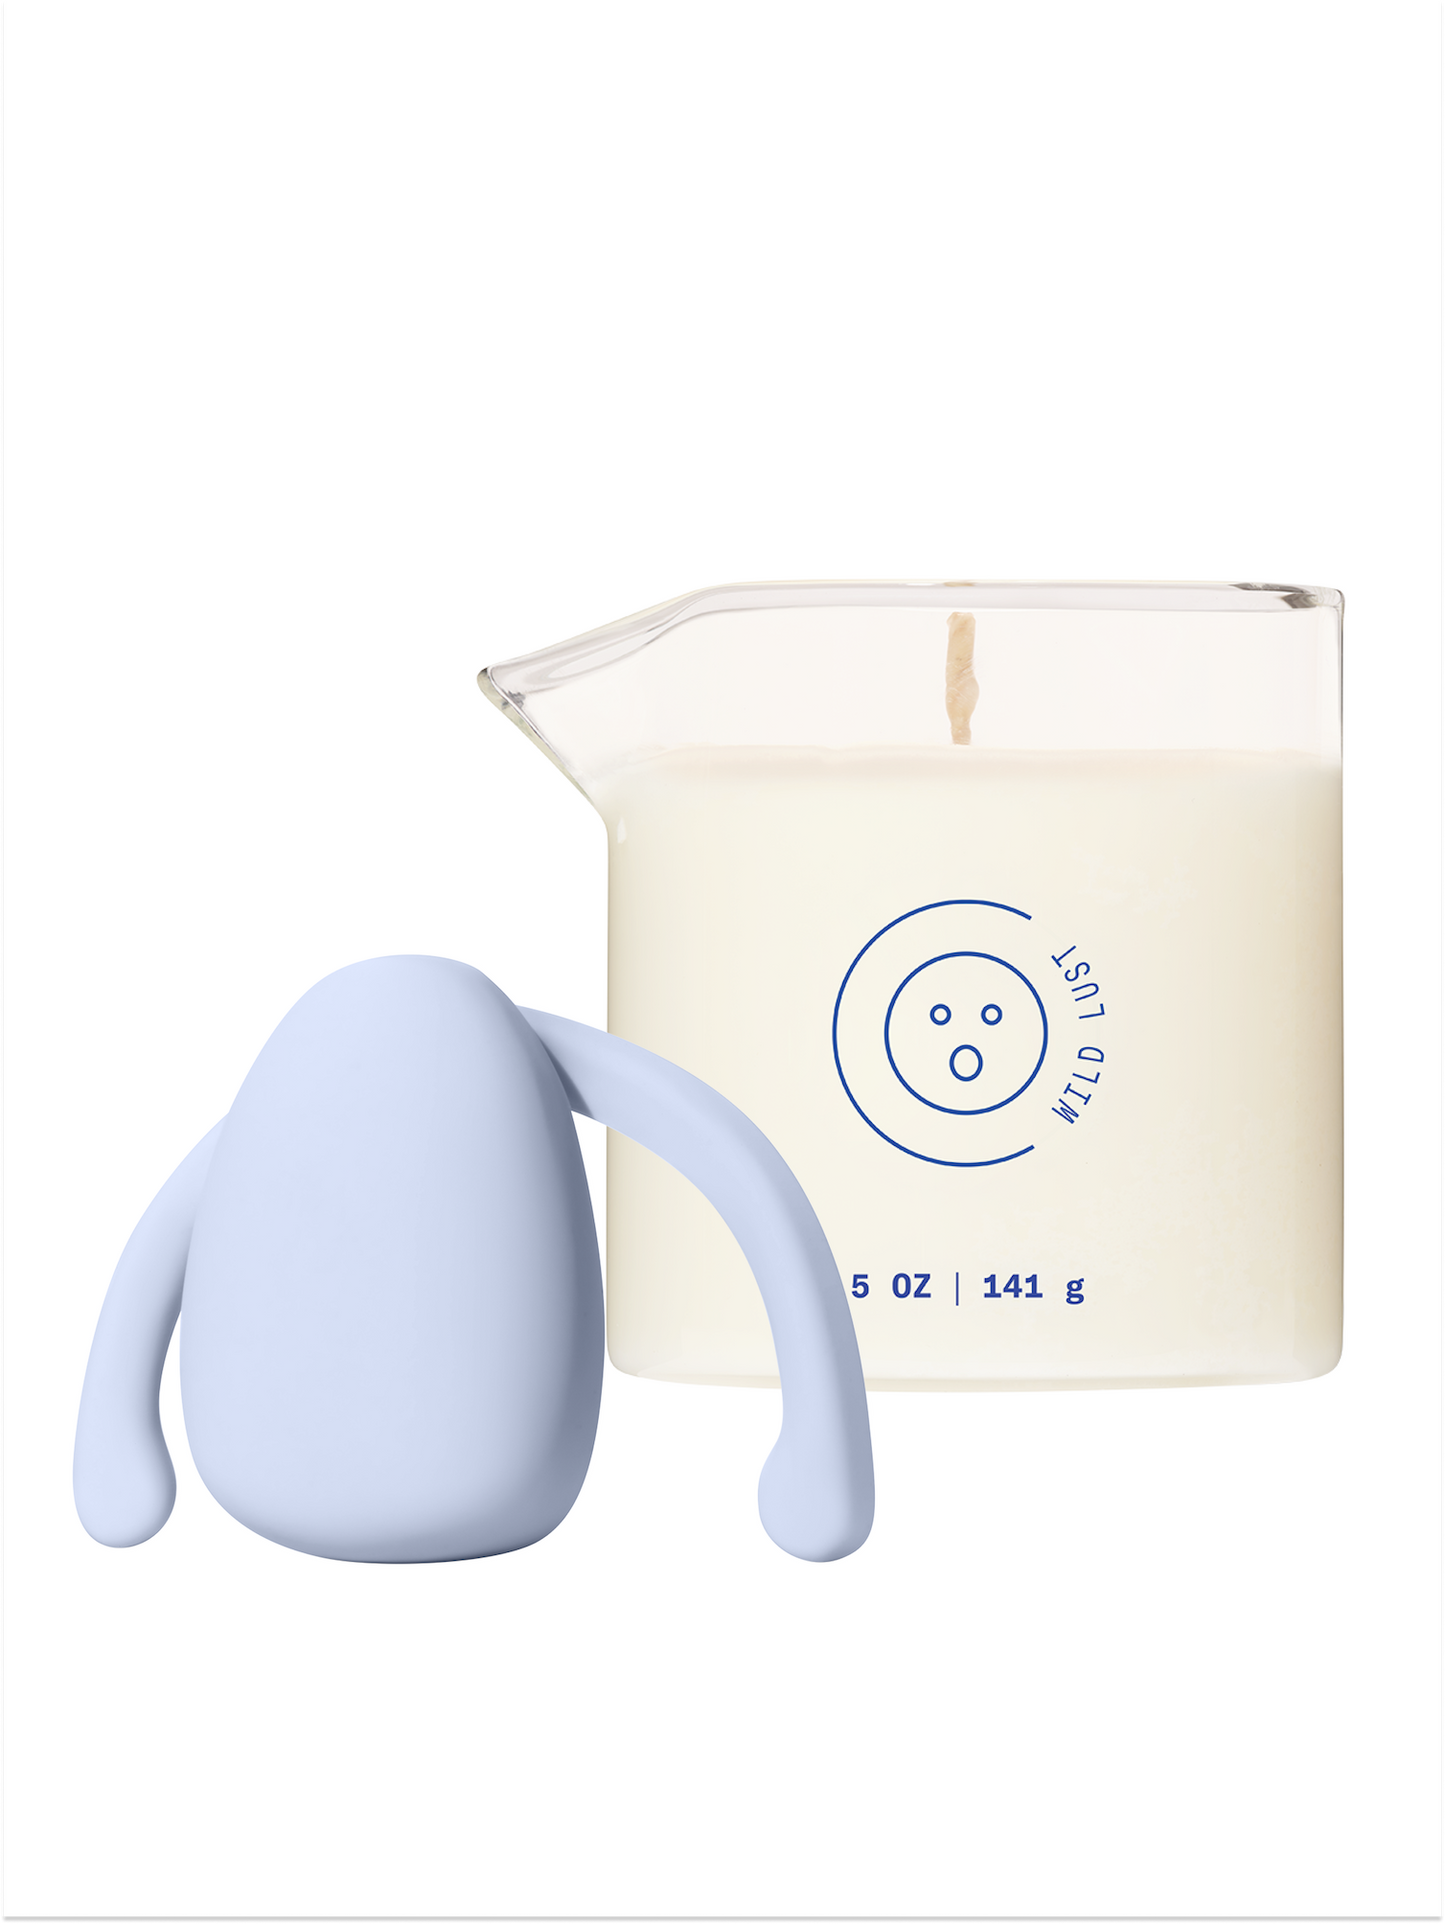 Eva hands-free vibrator in light blue/periwinkle next to massage oil candle in scent Wild Lust.